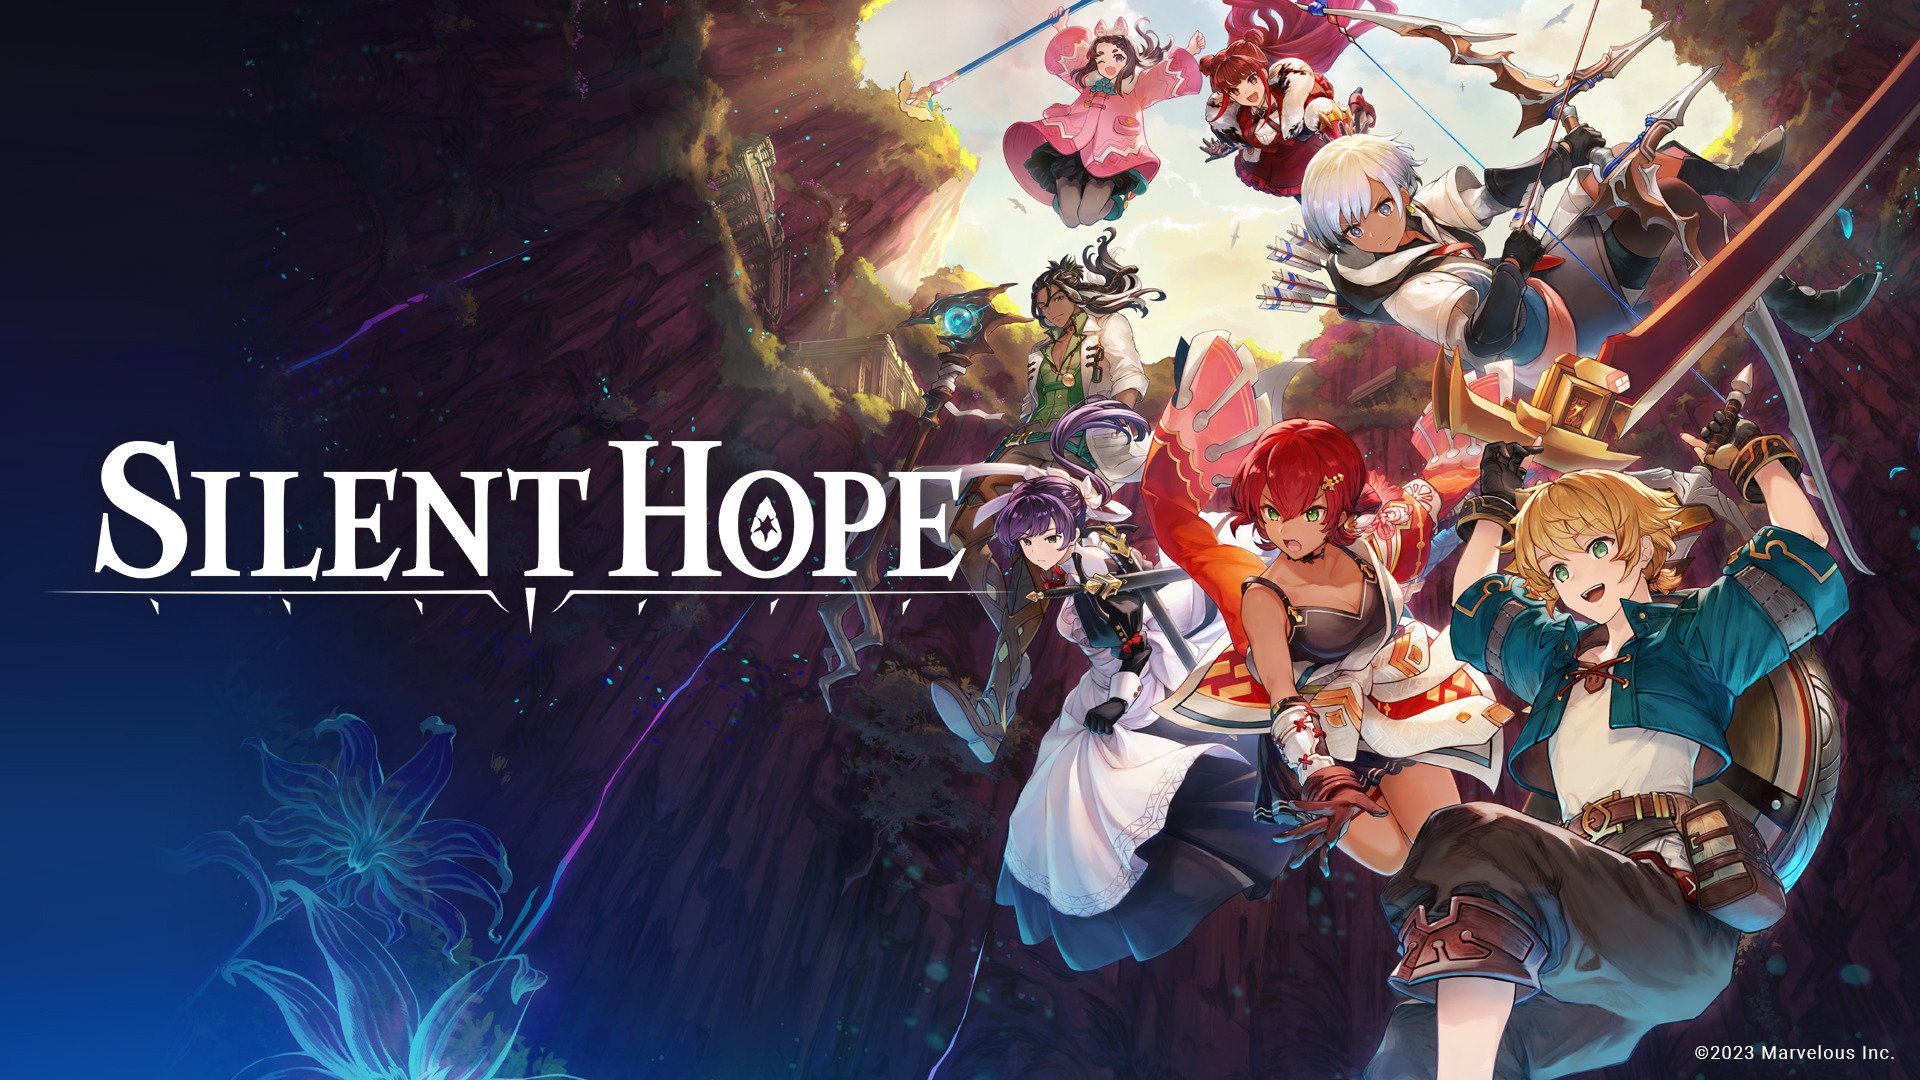 Marvelous announces isometric action RPG Silent Hope for Switch